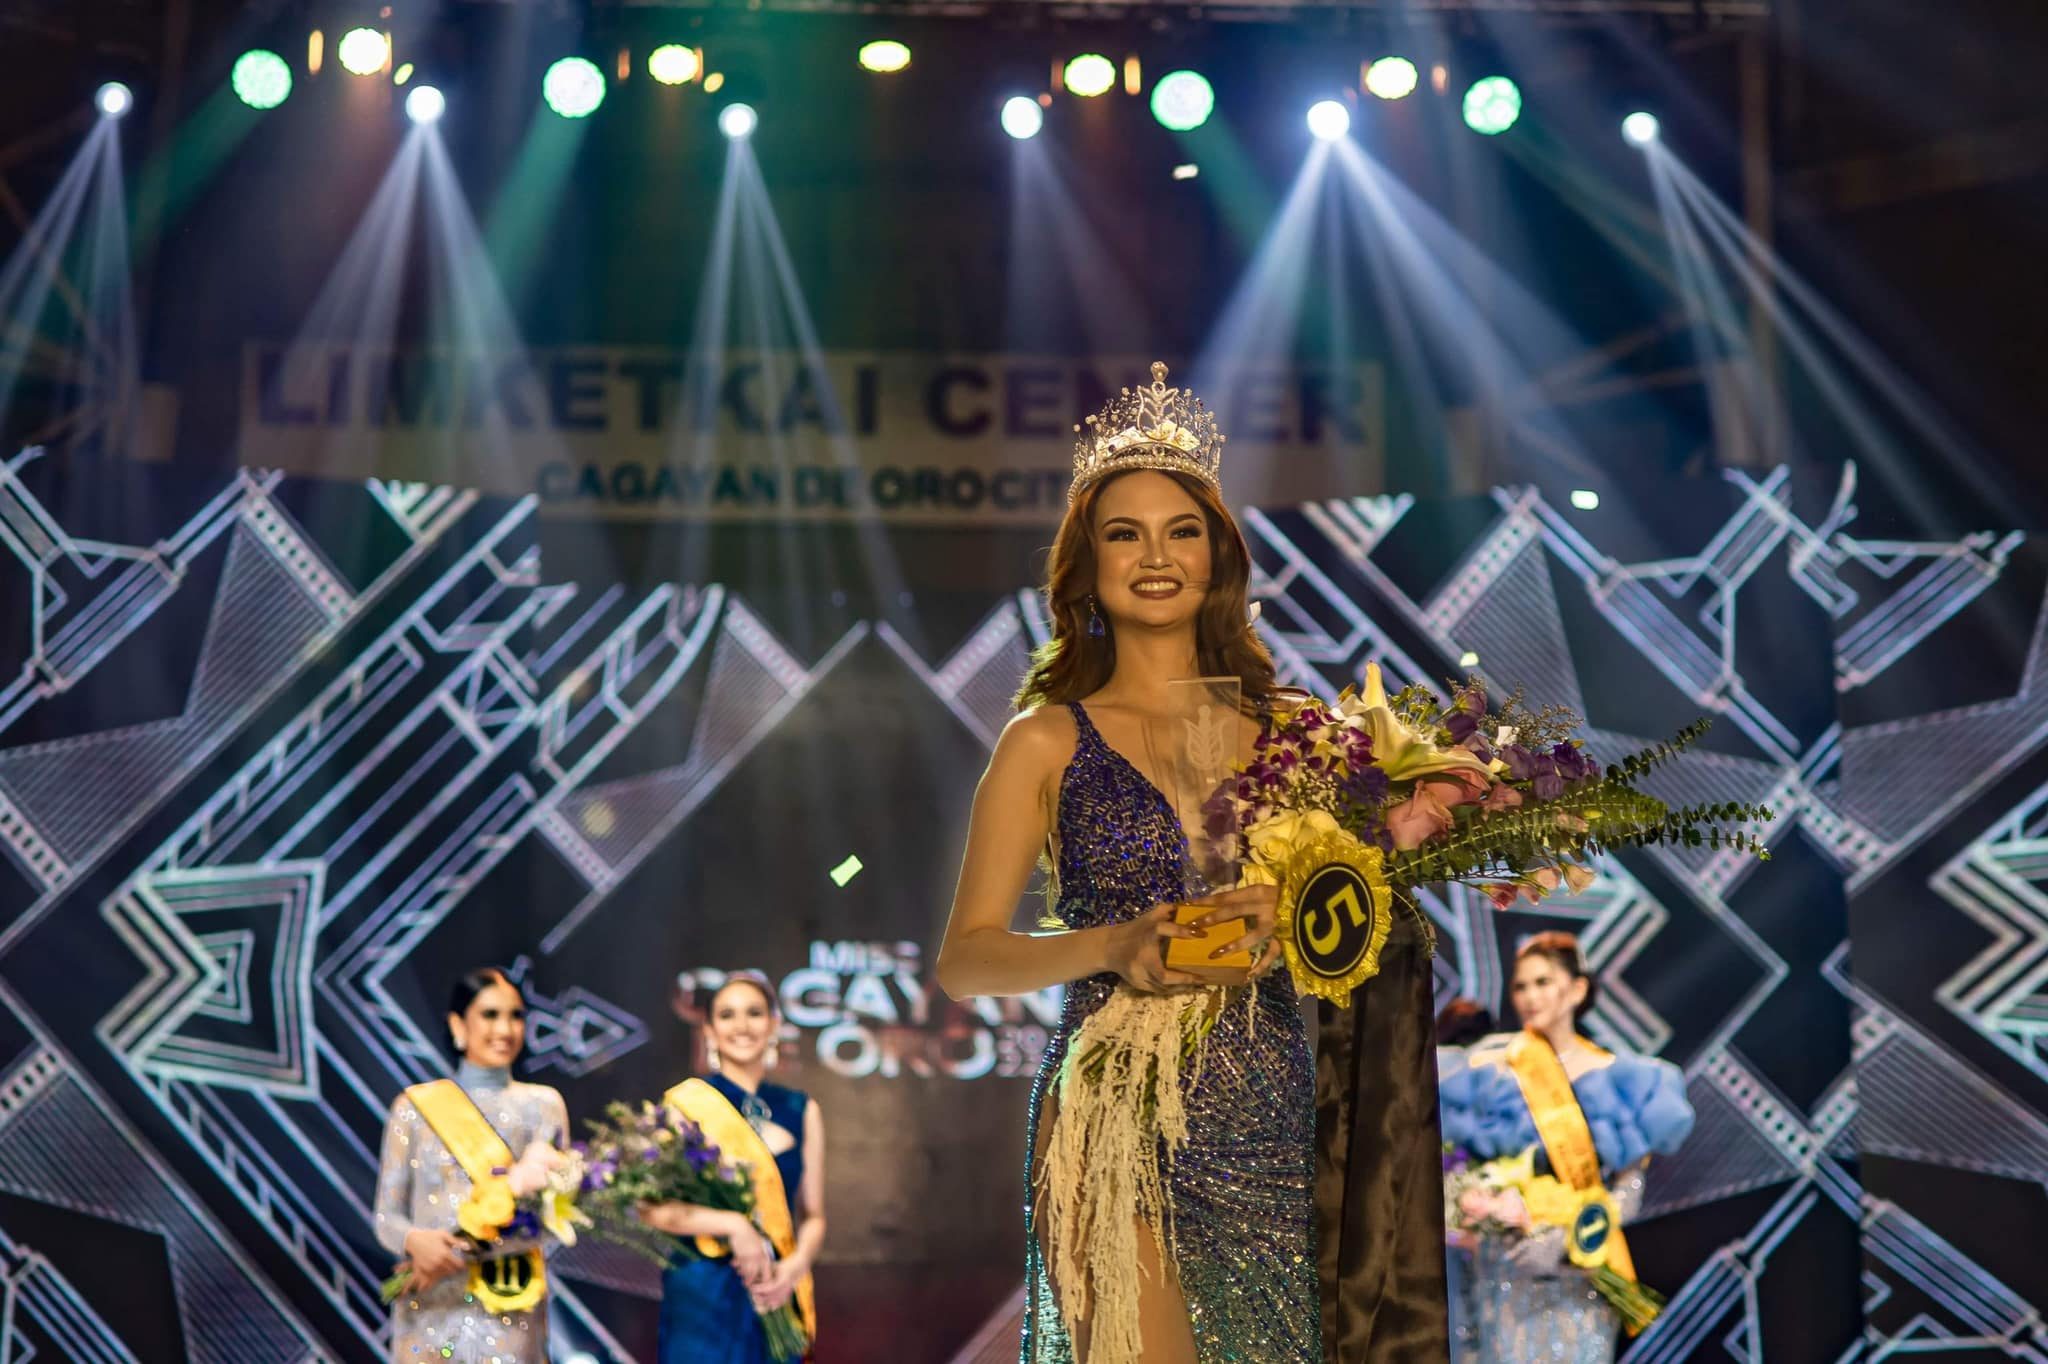 The mayor of Cagayan de Oro needs to revoke the pageant’s franchise due to dangerous singing